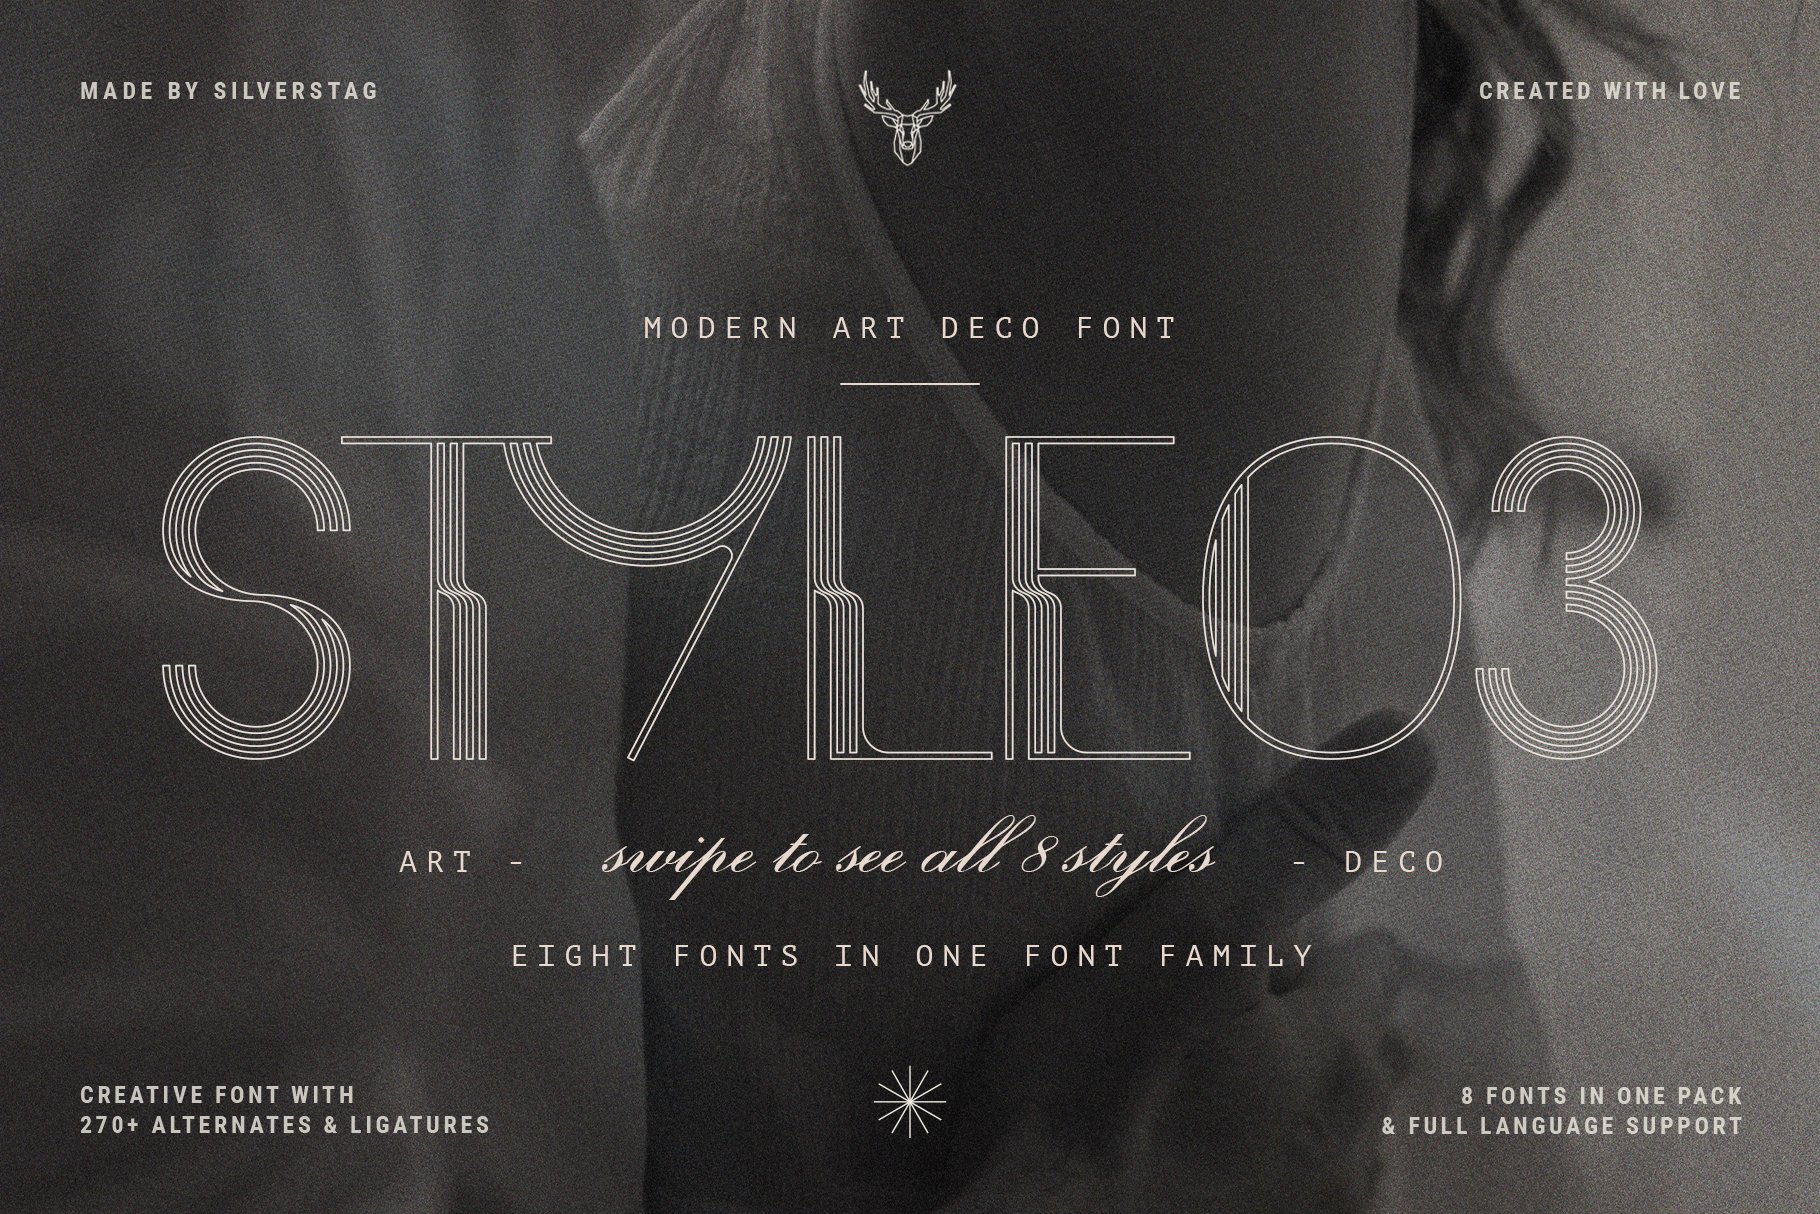 25 bogart deco a ligature rich font family by silver stag 953